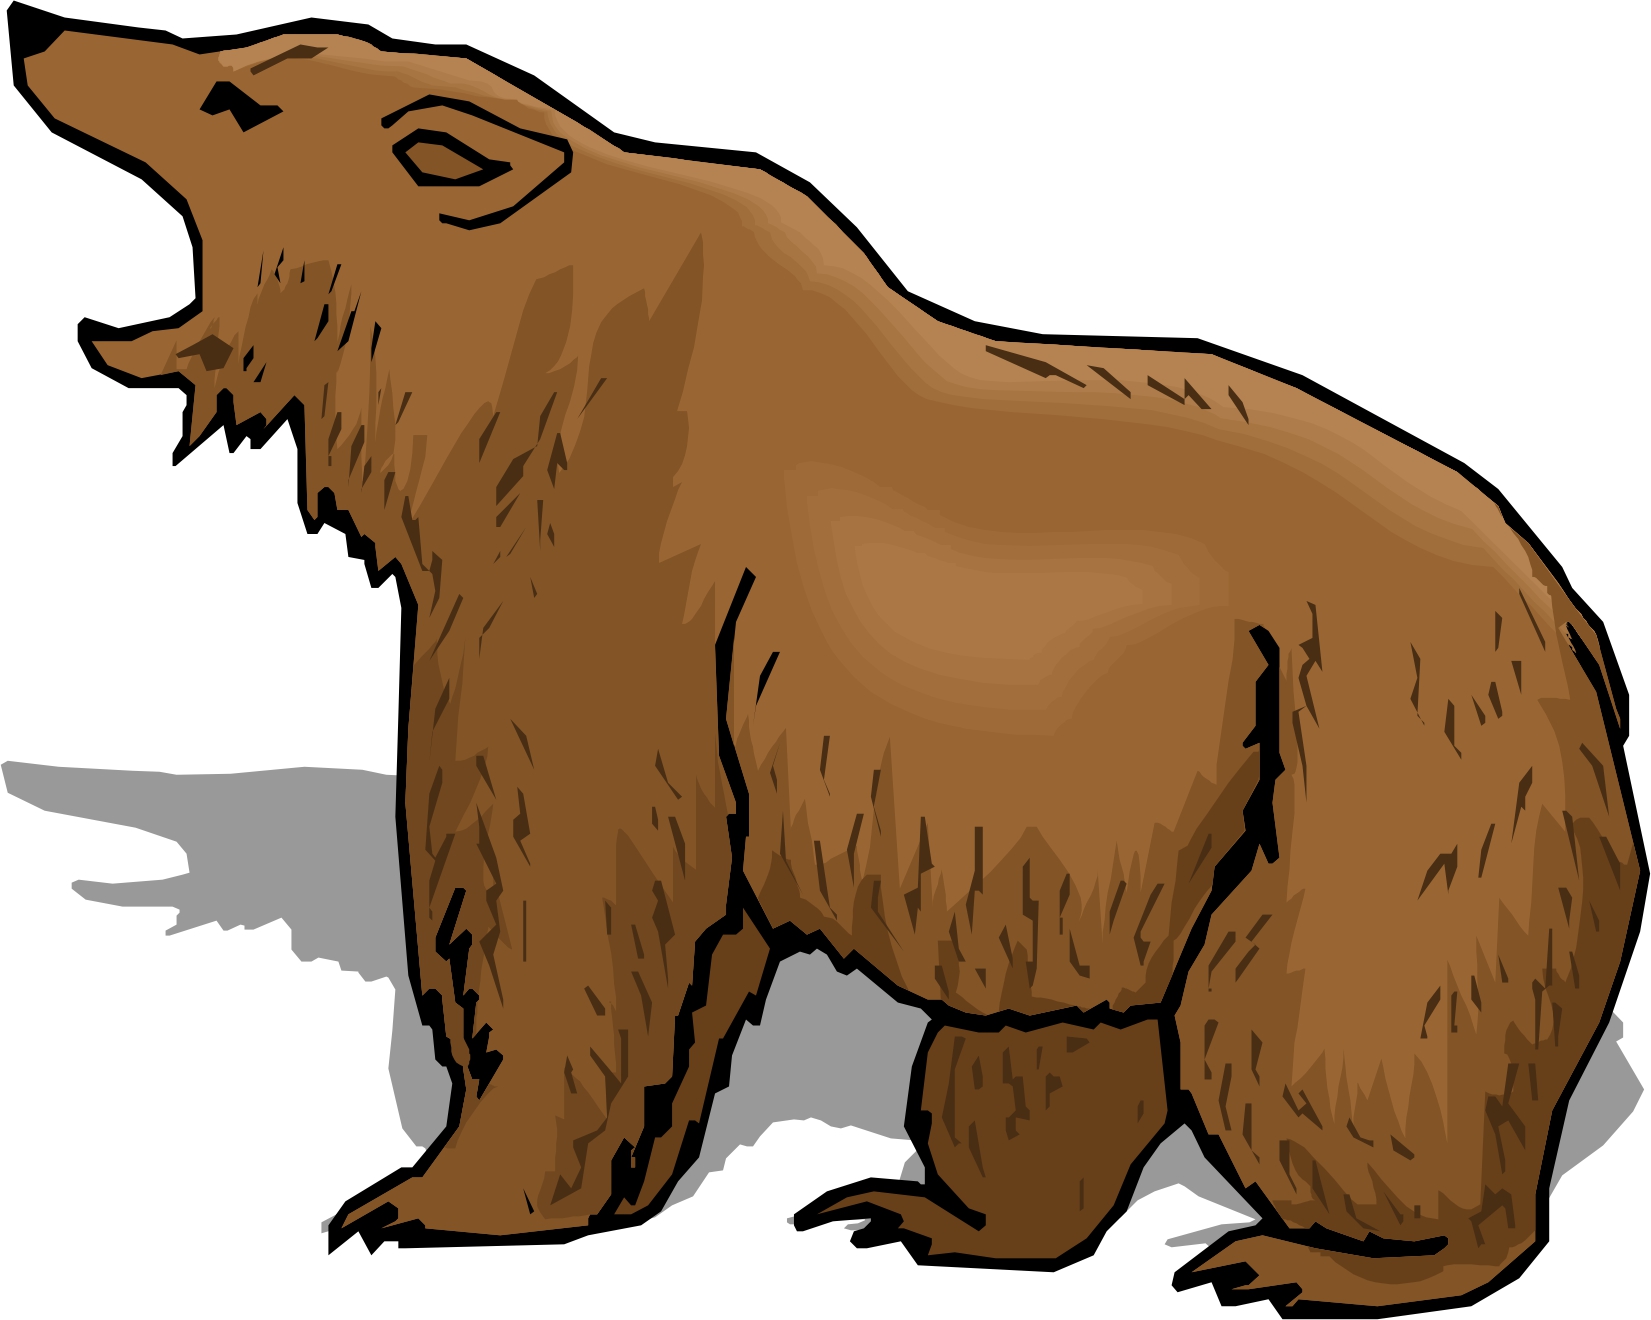 Clip Arts Related To : clipart grizzly bear. view all Scared Bear Cliparts)...